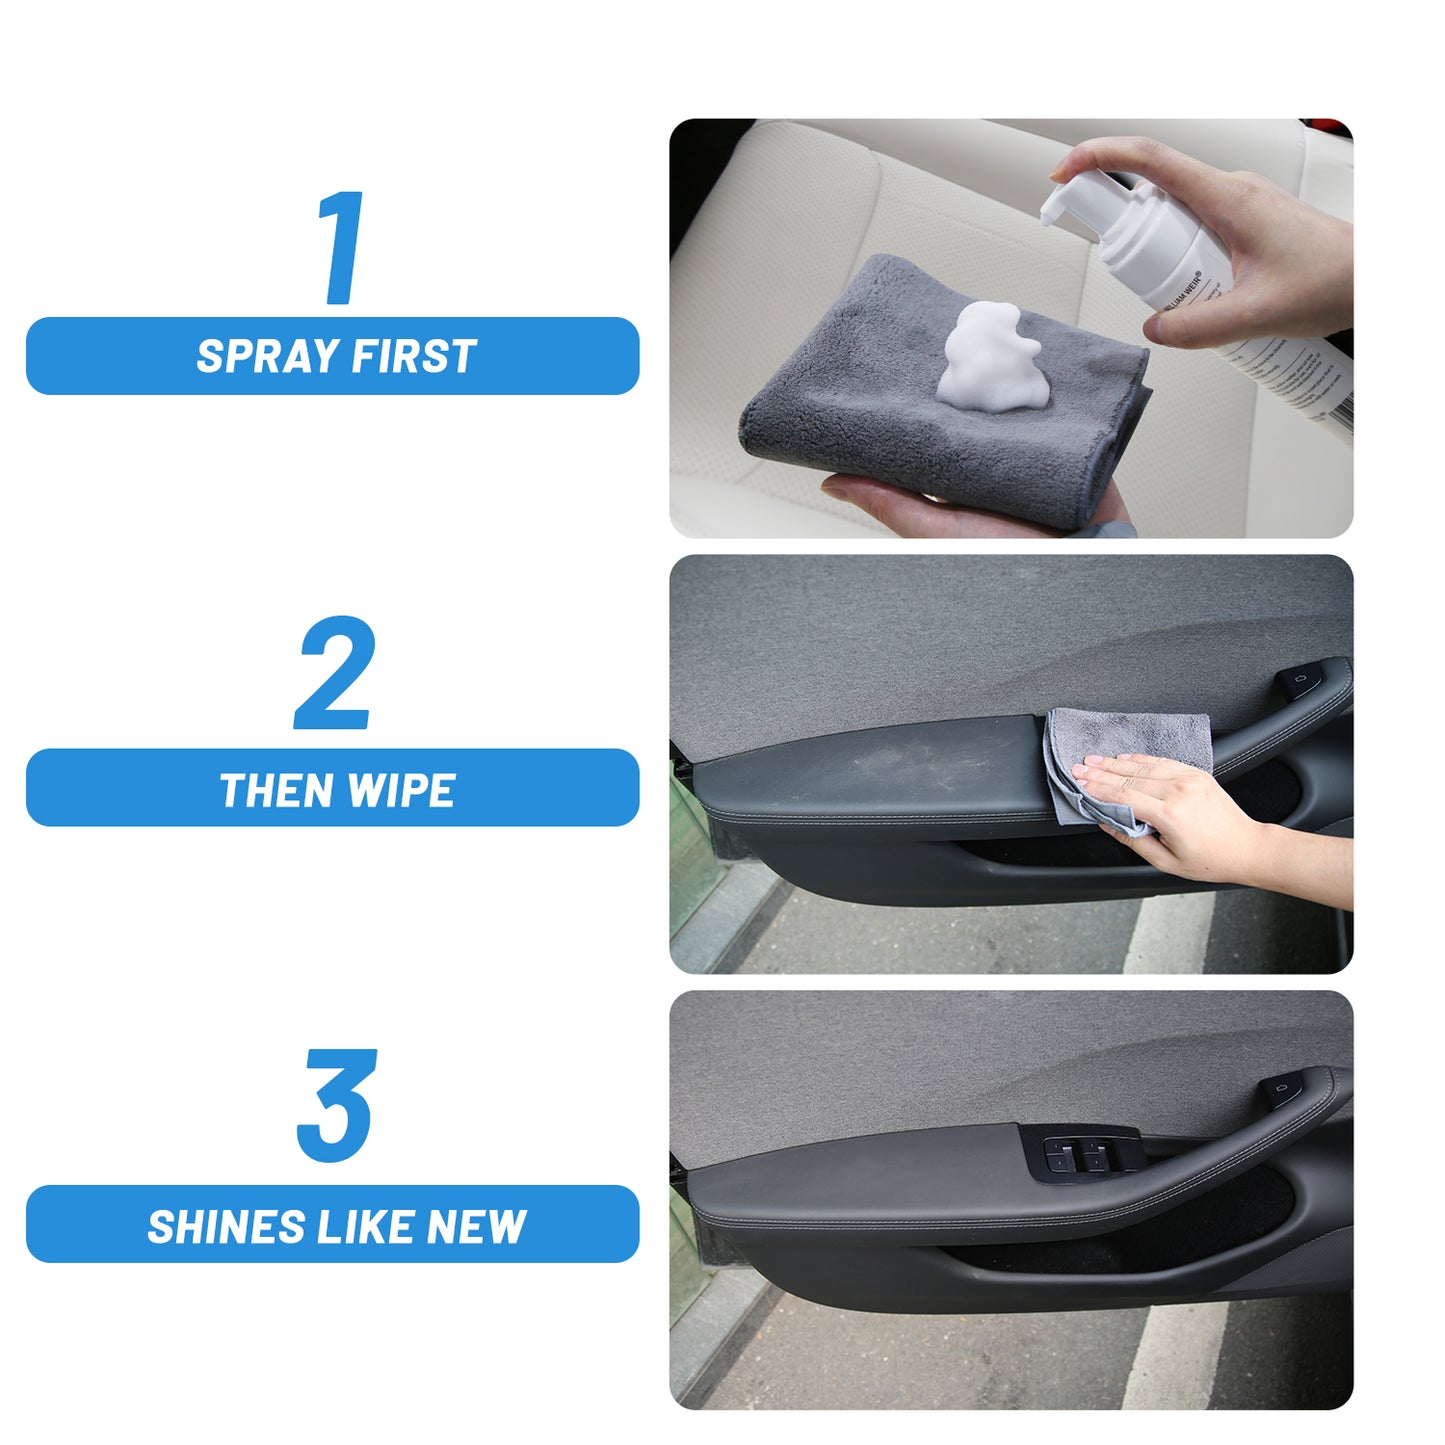 Super Powerful Cleaner Eco-Friendly Stain Cleaner for Tesla Model 3/Y/S/X CyberTruck Car Interiors